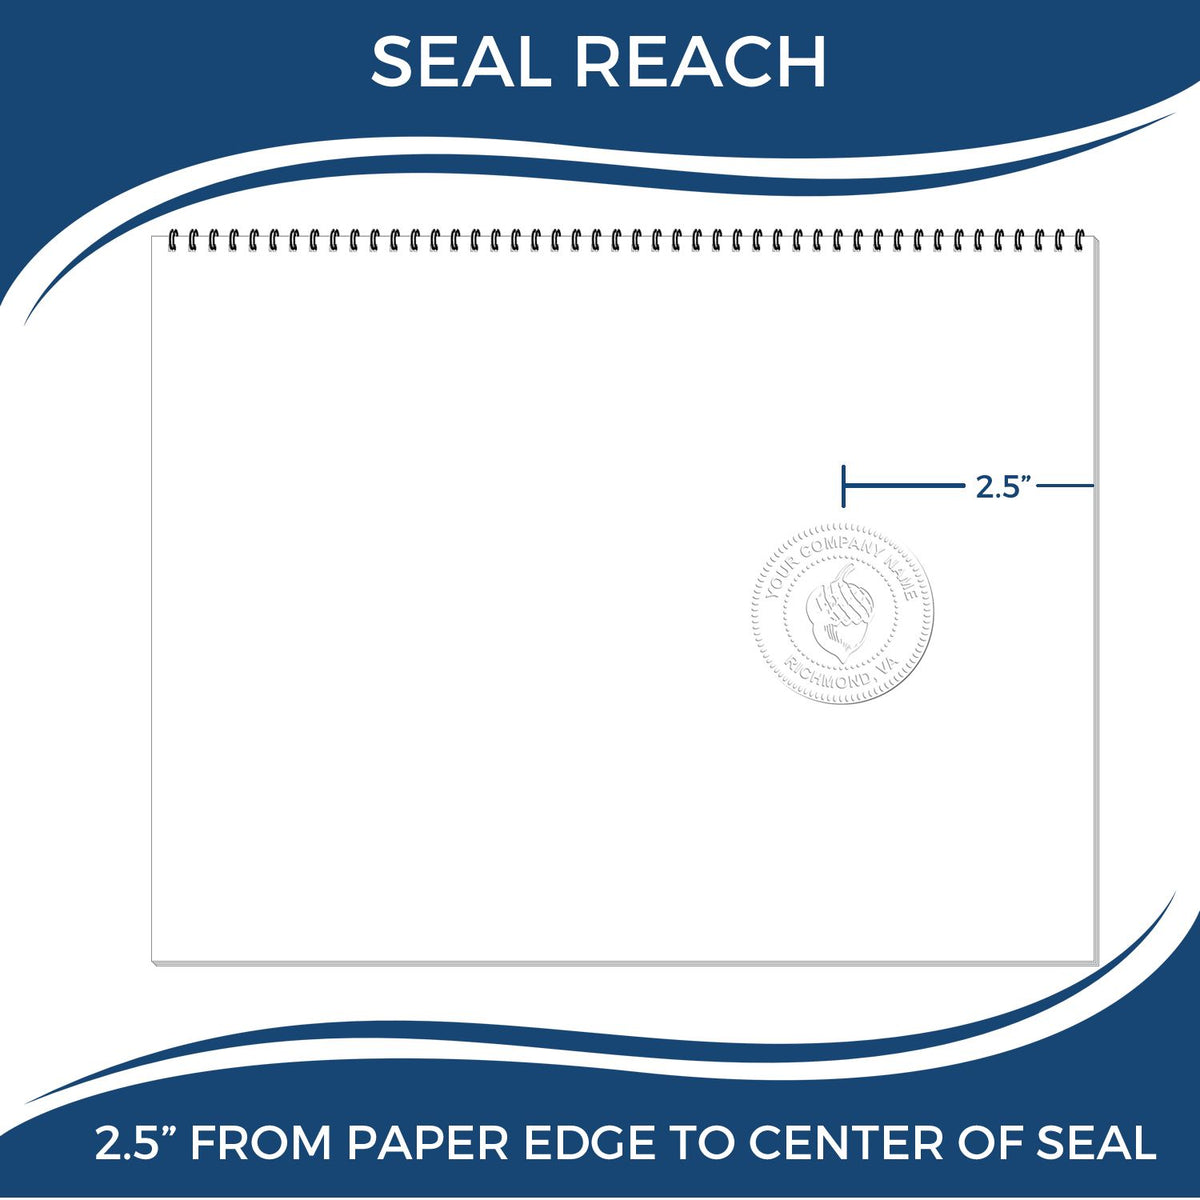 An infographic showing the seal reach which is represented by a ruler and a miniature seal image of the Long Reach Vermont Geology Seal